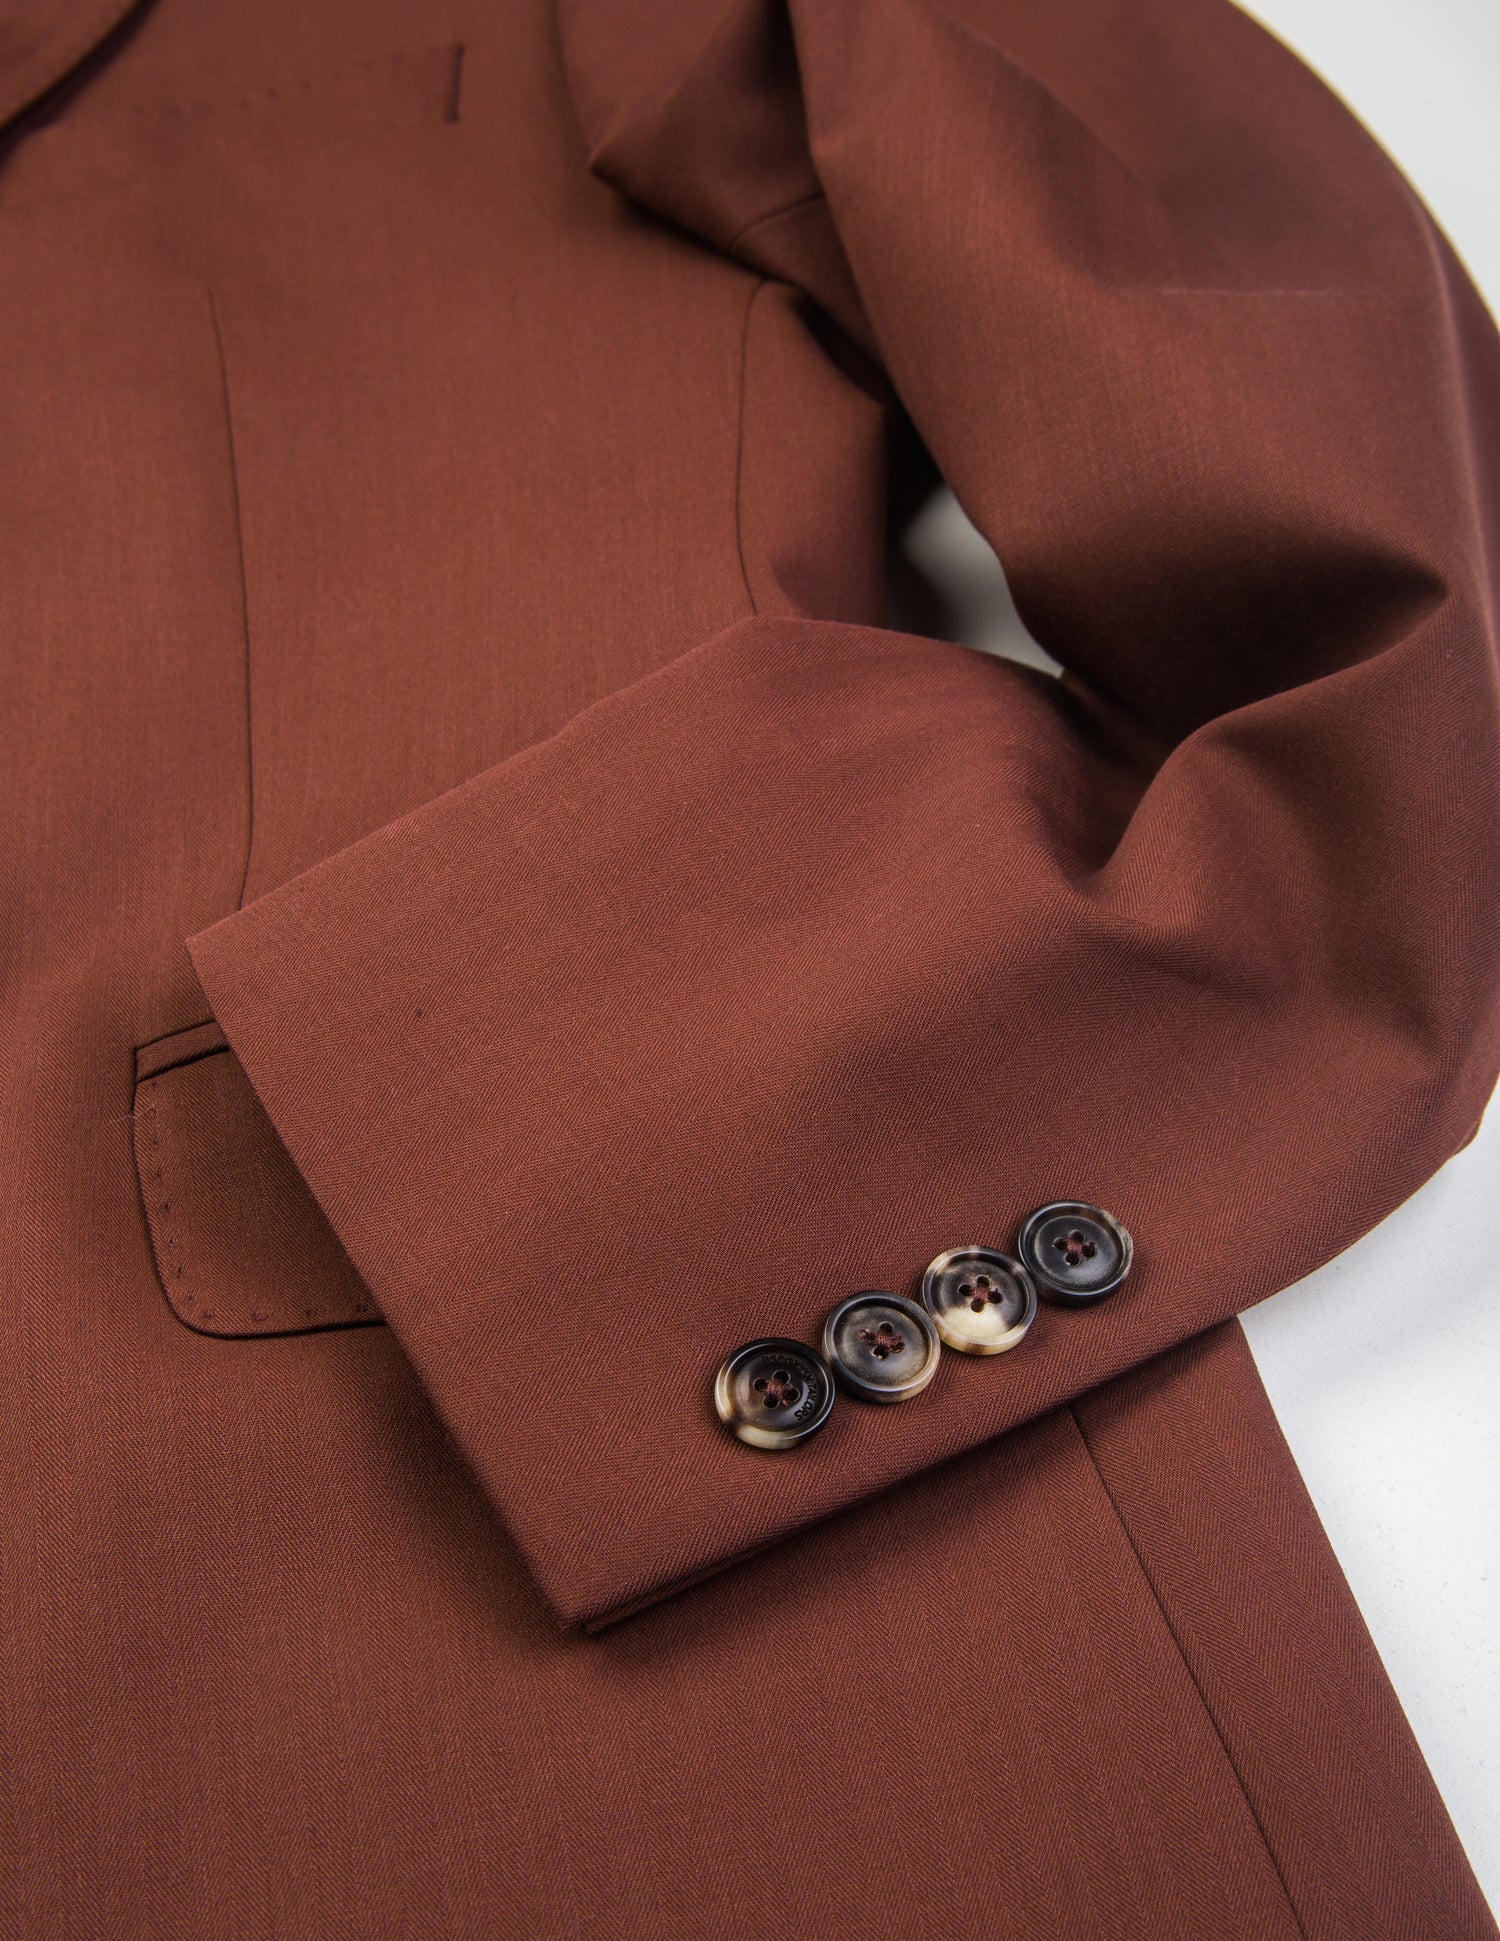 Detail shot of Brooklyn Tailors BKT50 Tailored Jacket in Herringbone Wool/Cotton - Brick showing sleeve and buttons